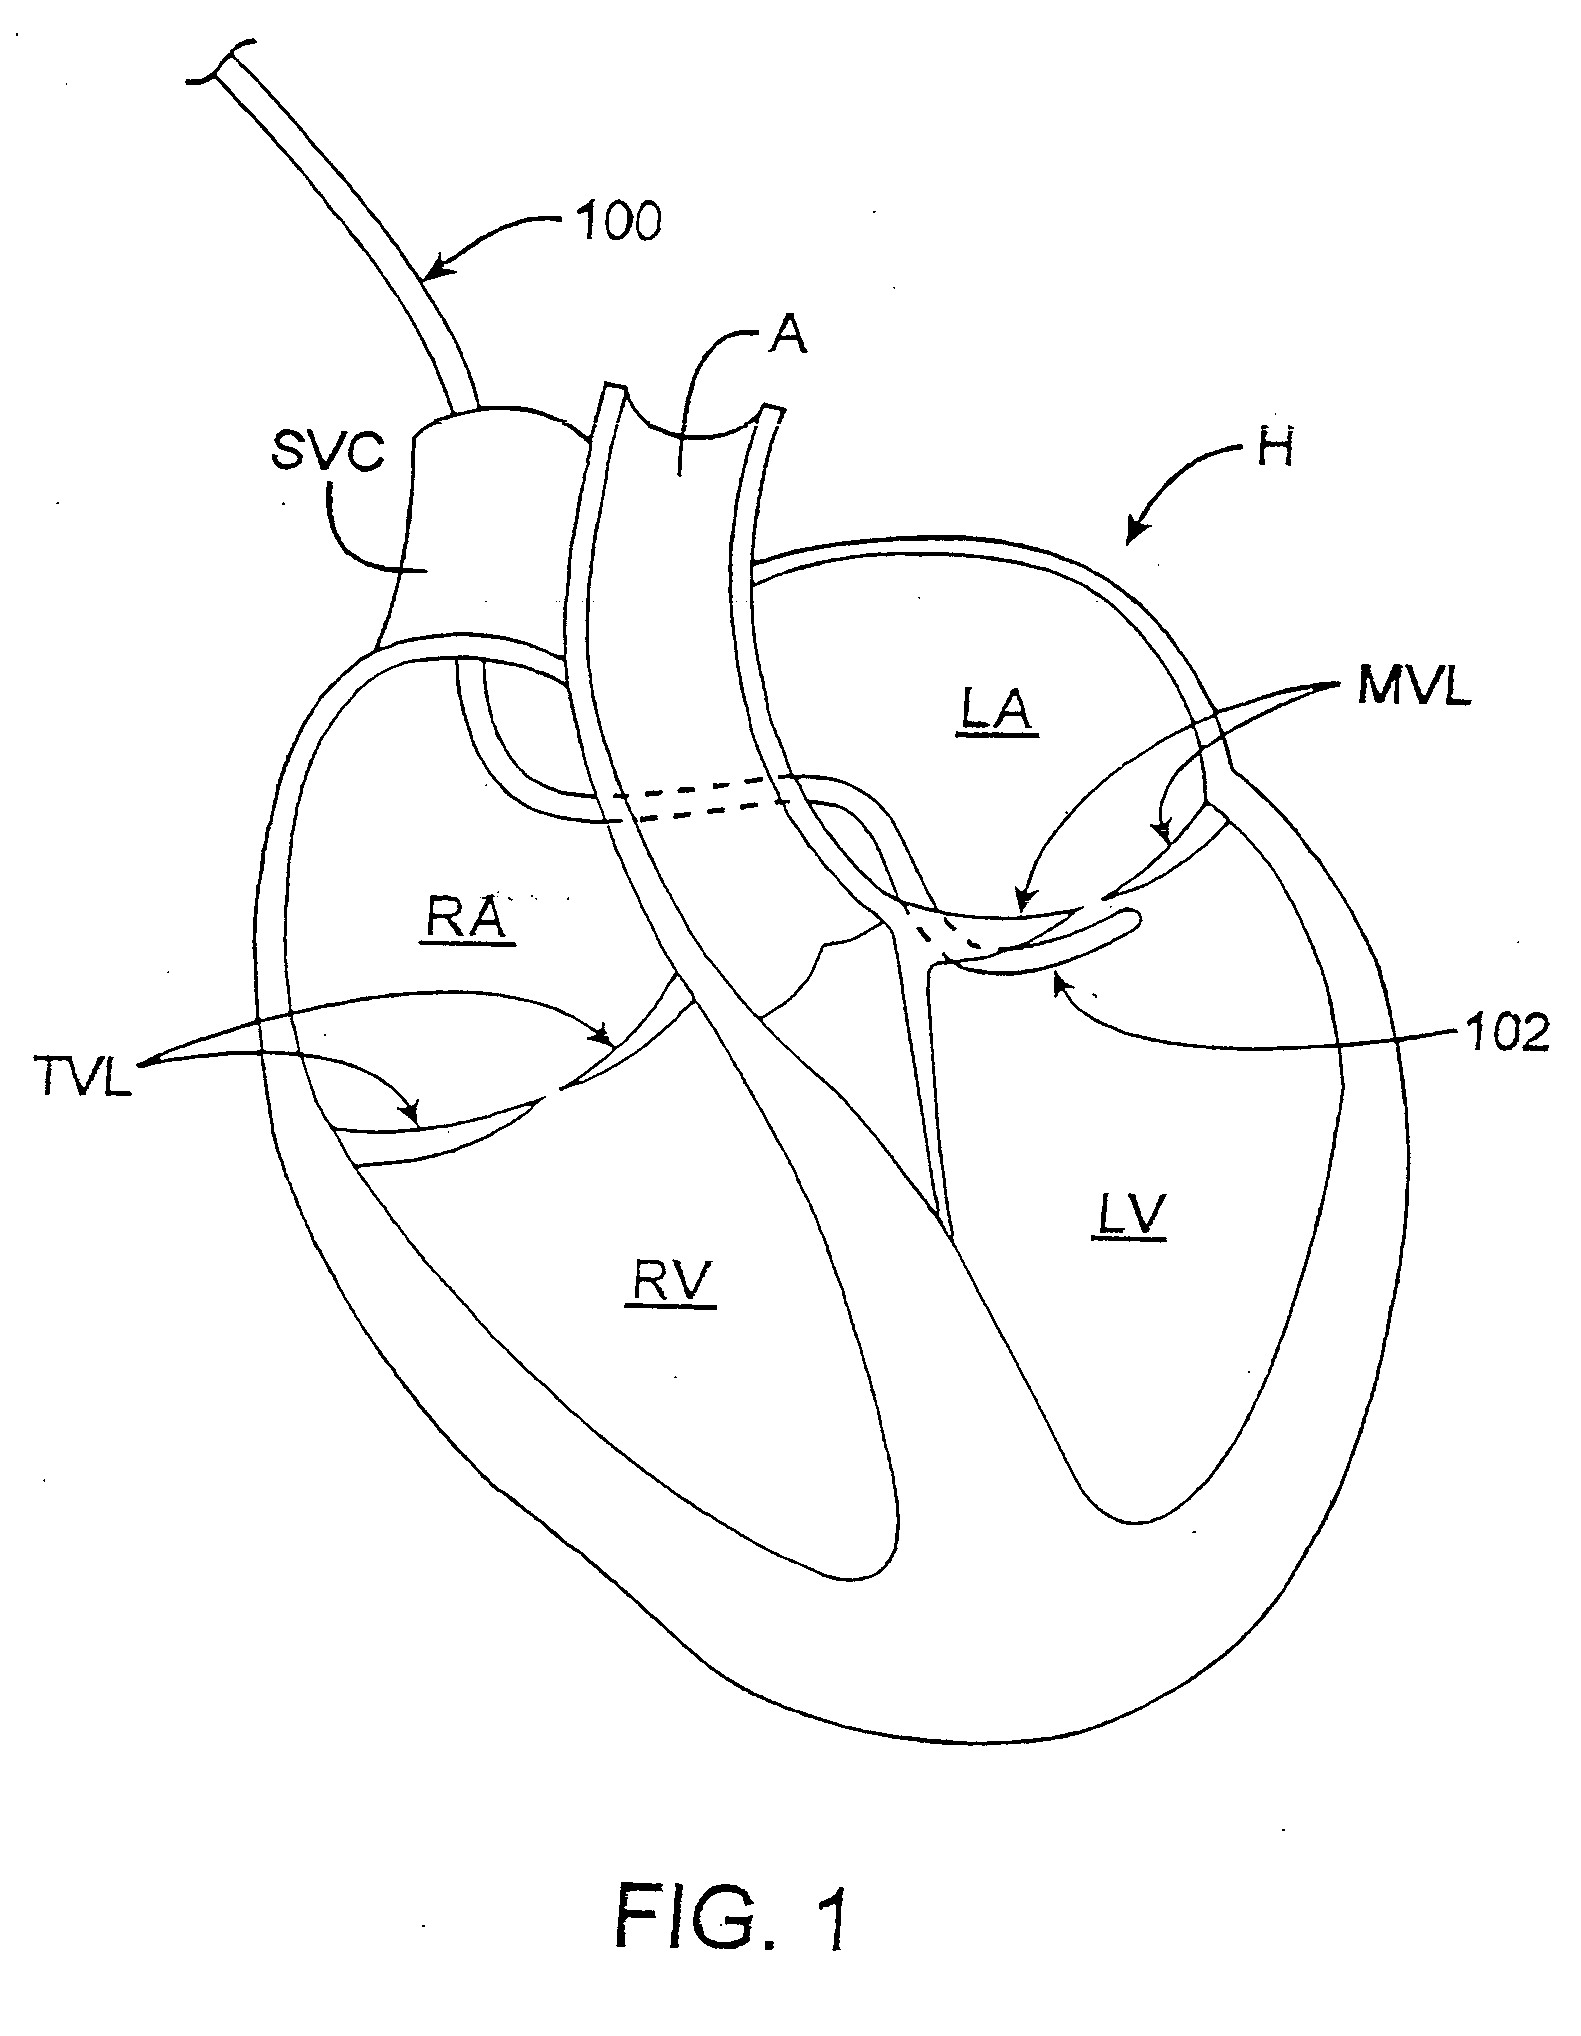 Remodeling a cardiac annulus